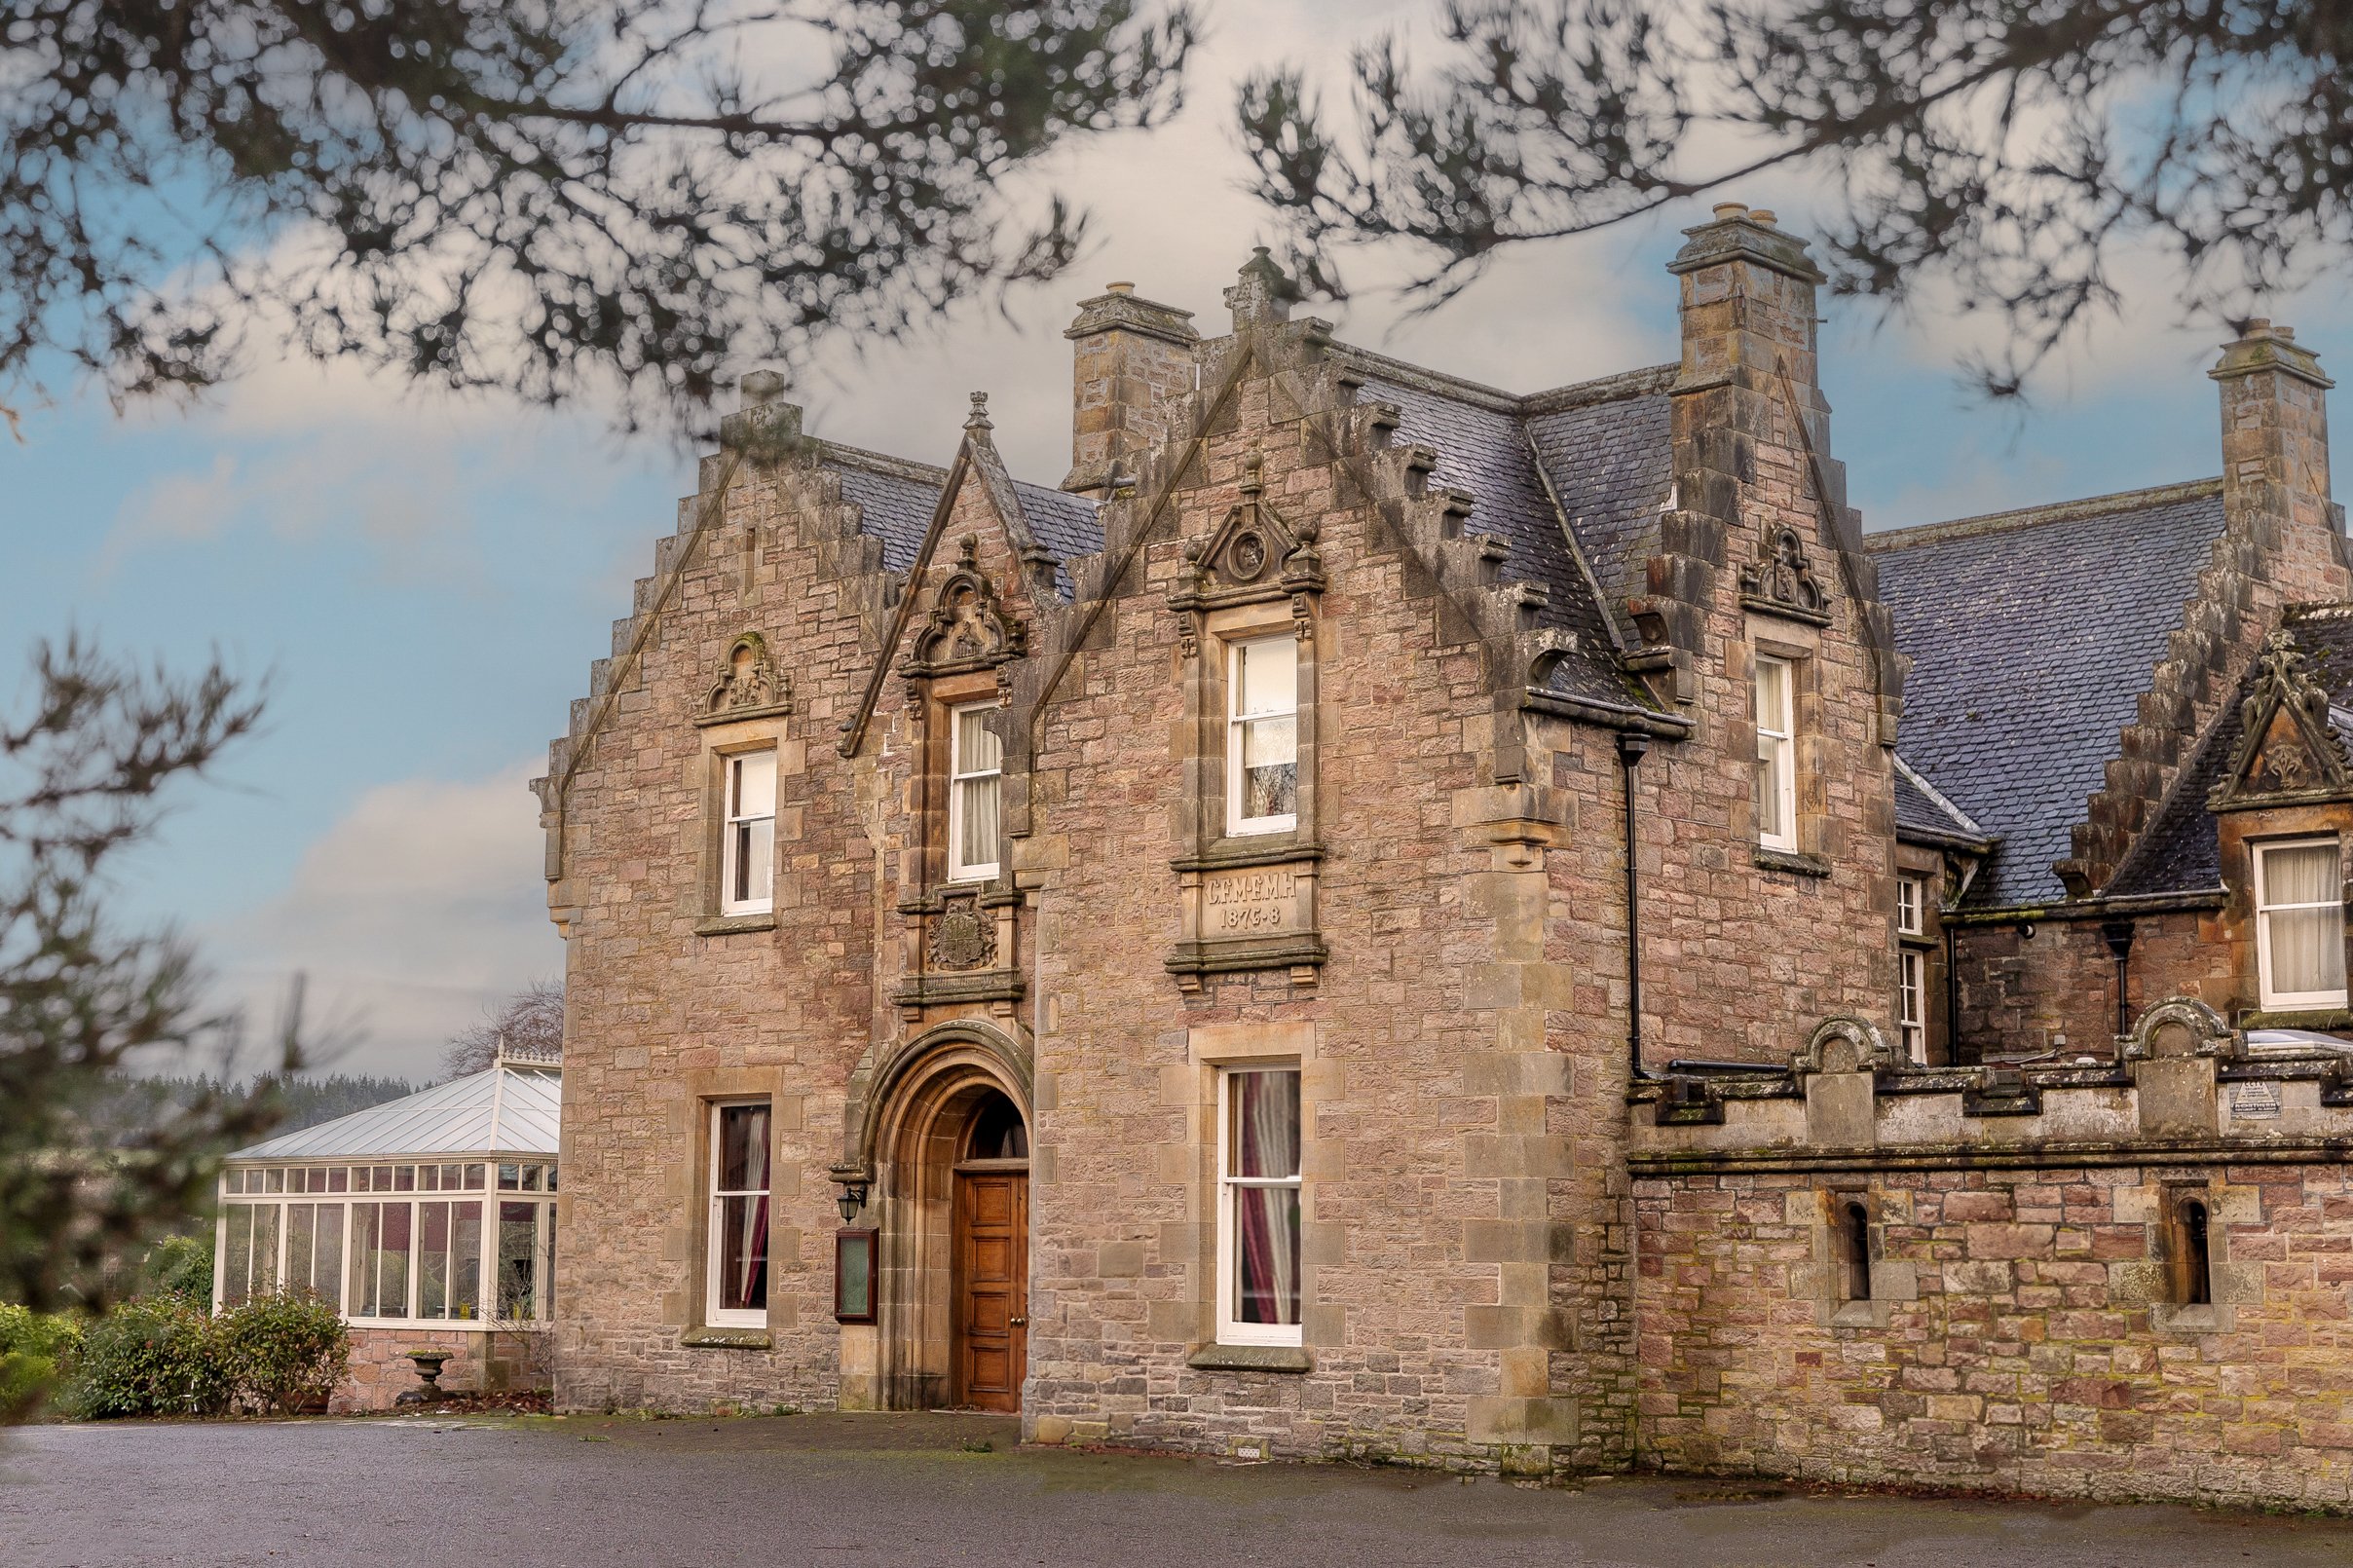 Highland Coast Hotels adds to portfolio with new four-star hotel in Inverness